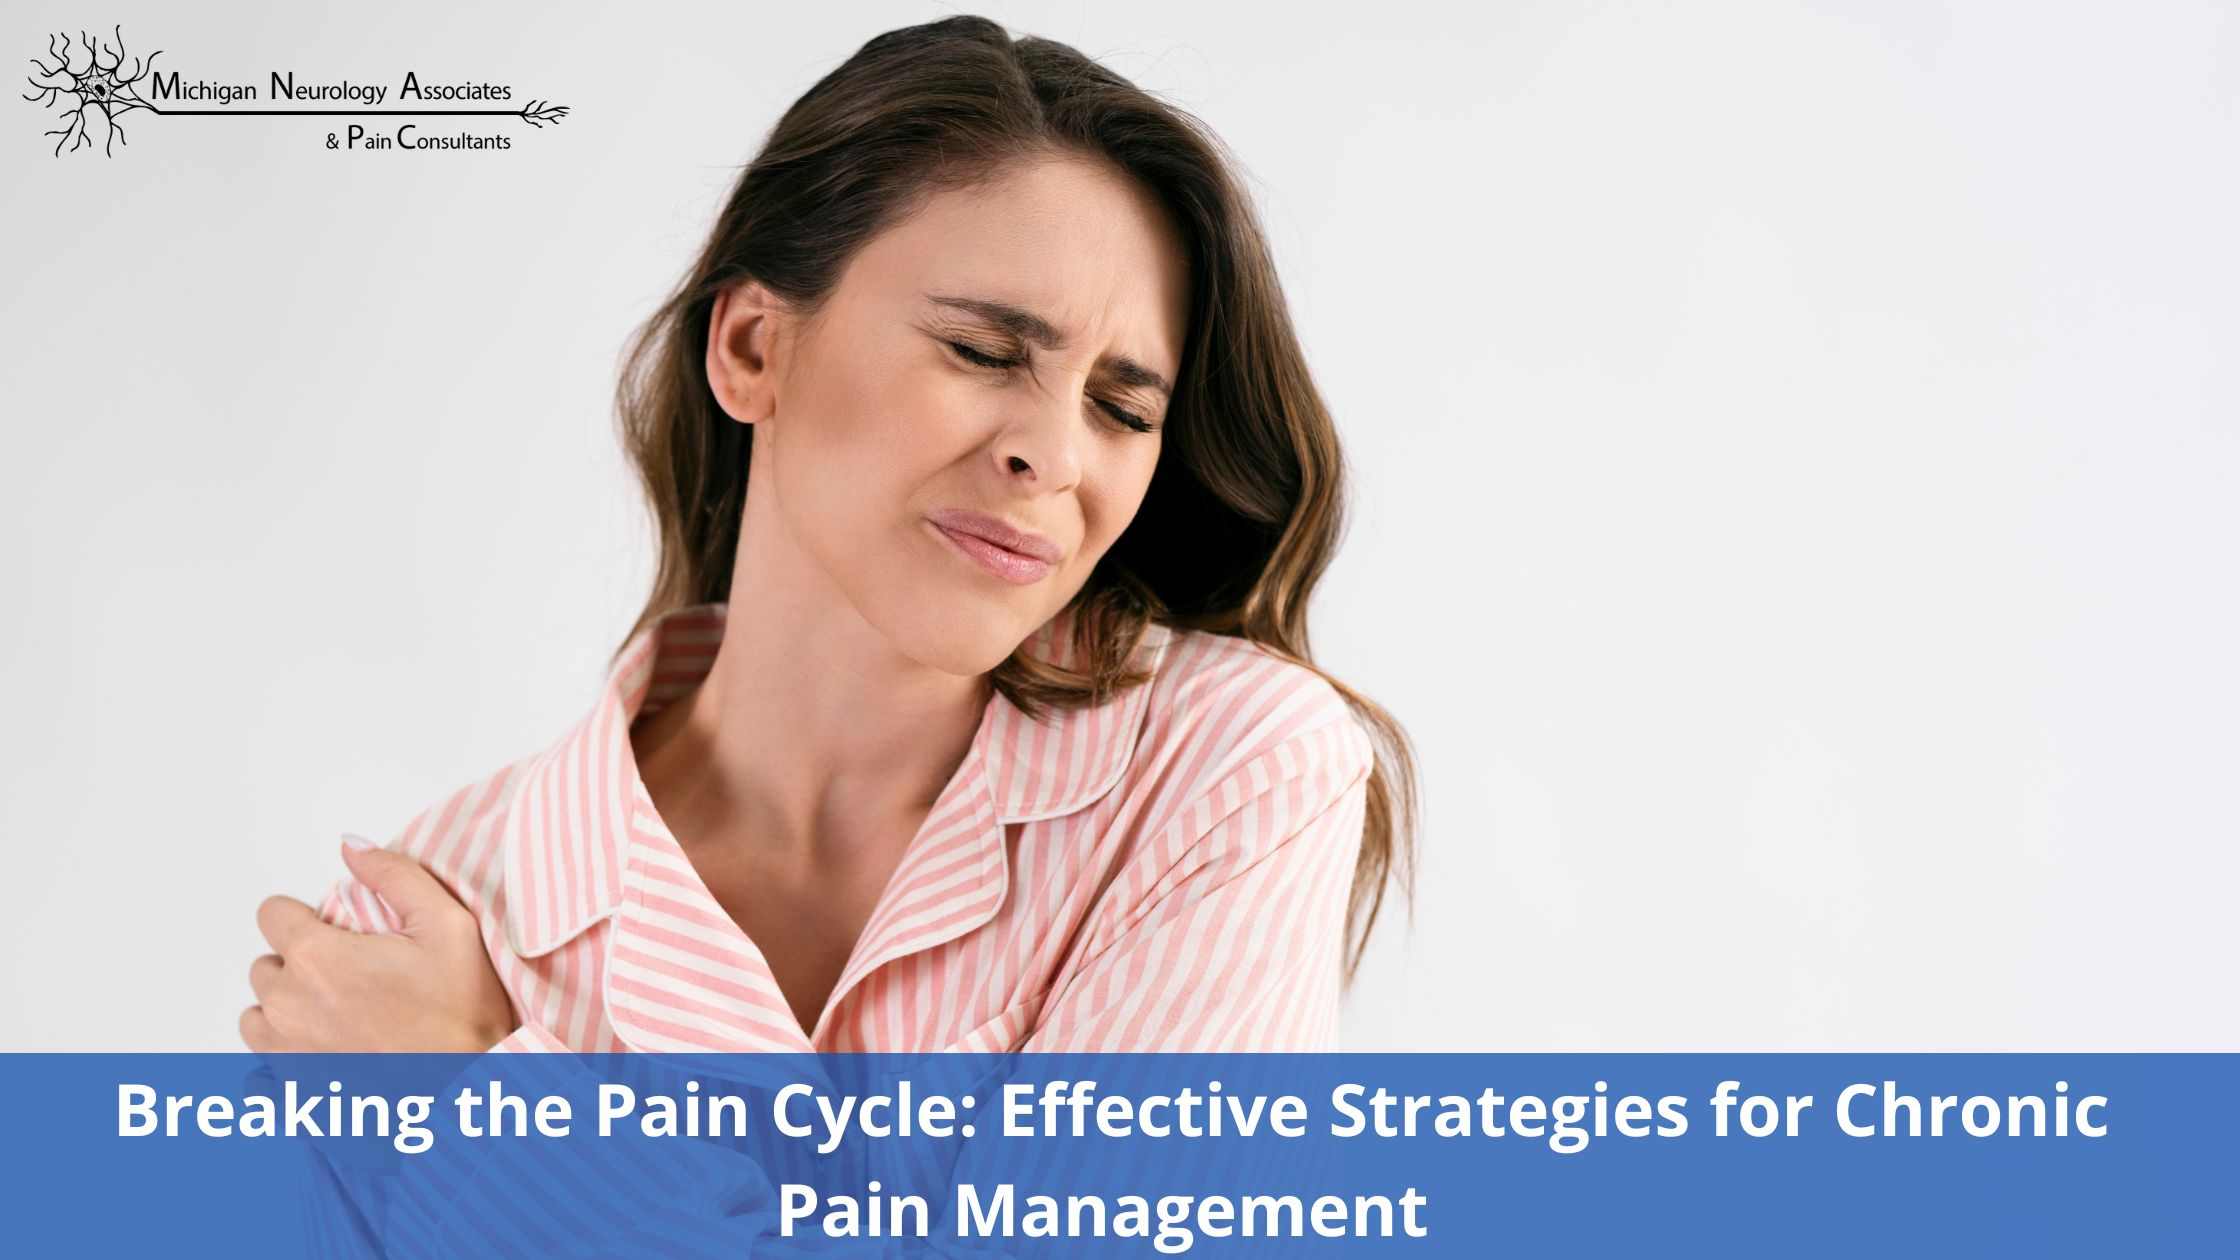 Breaking the Pain Cycle: Effective Strategies for Chronic Pain Management 